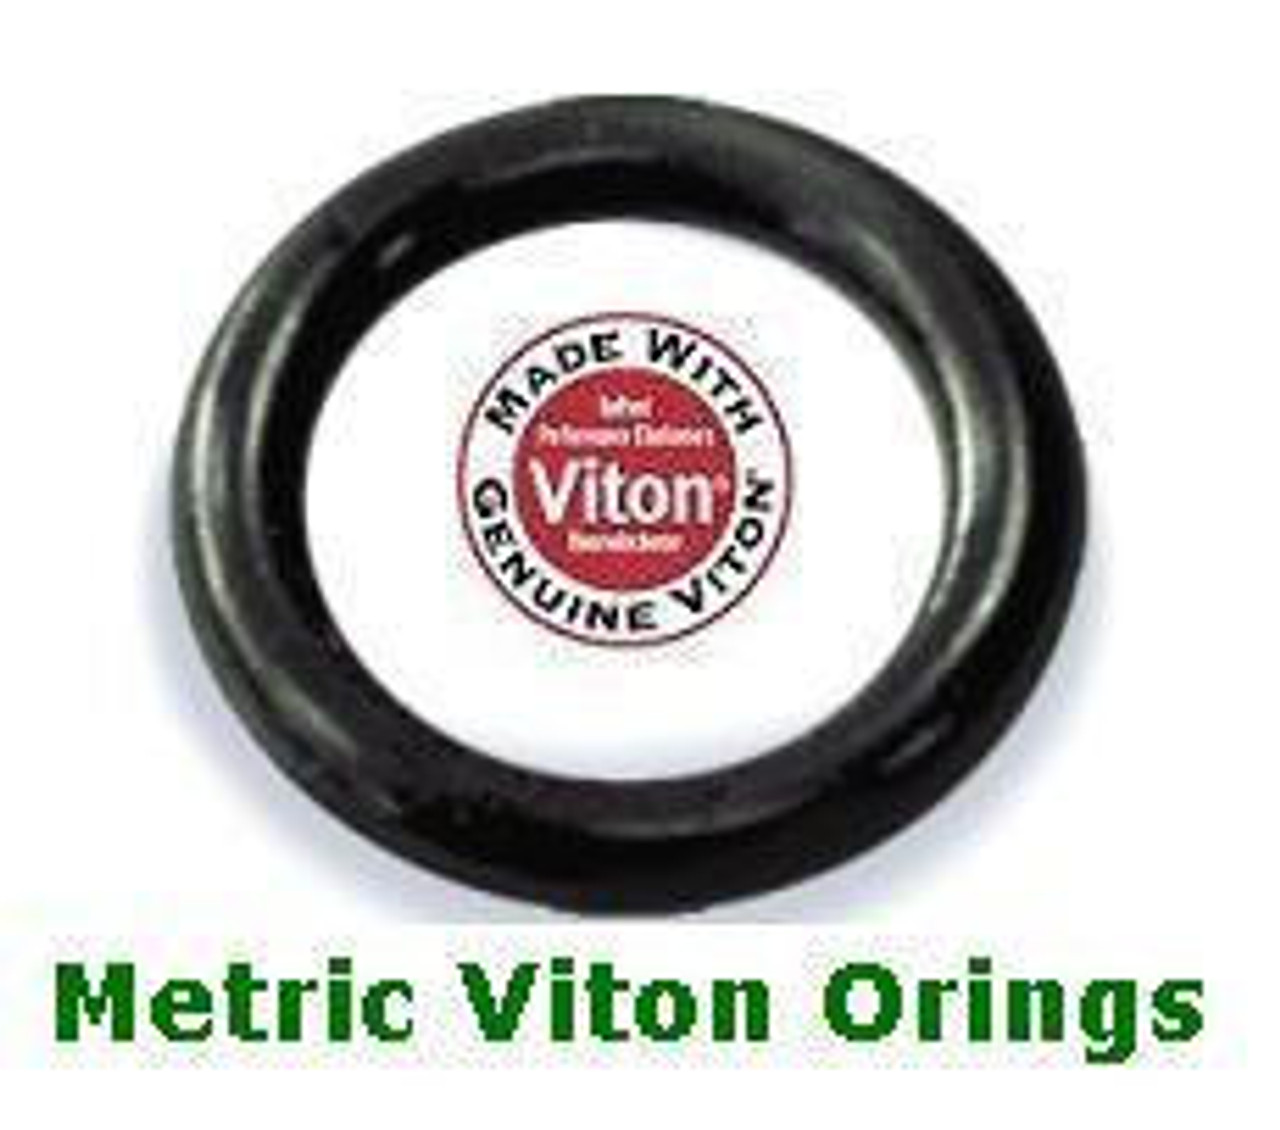 FKM O-ring 98 x 3mm Price for 1 pc